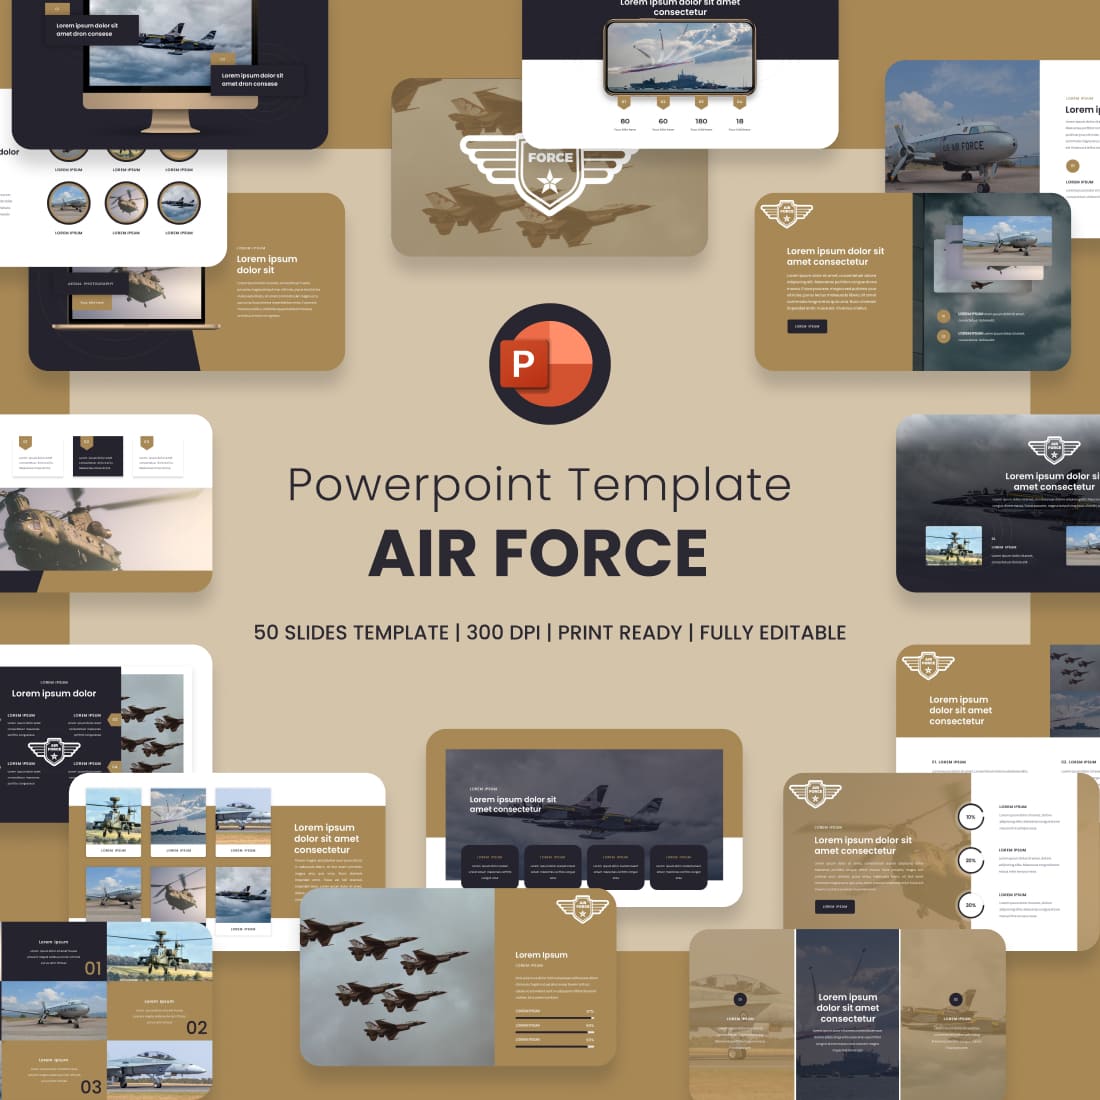 Airforce powerpoint template cover image.